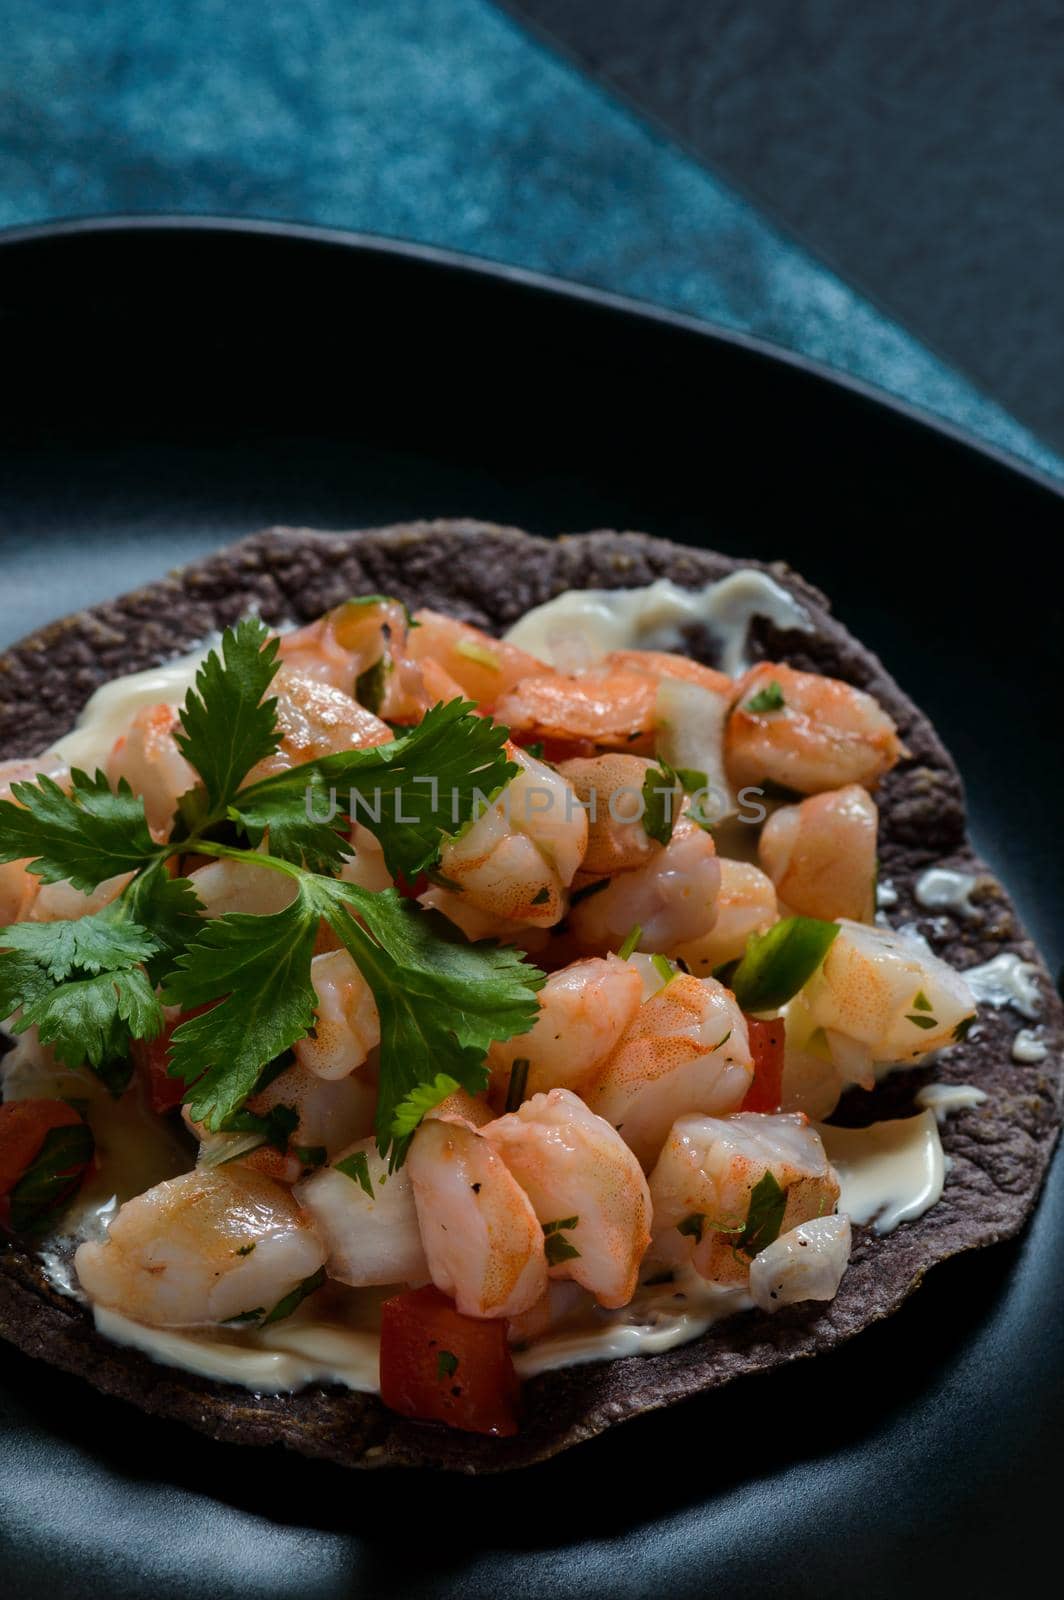 Red shrimp ceviche and blue corn tostadas by RobertPB